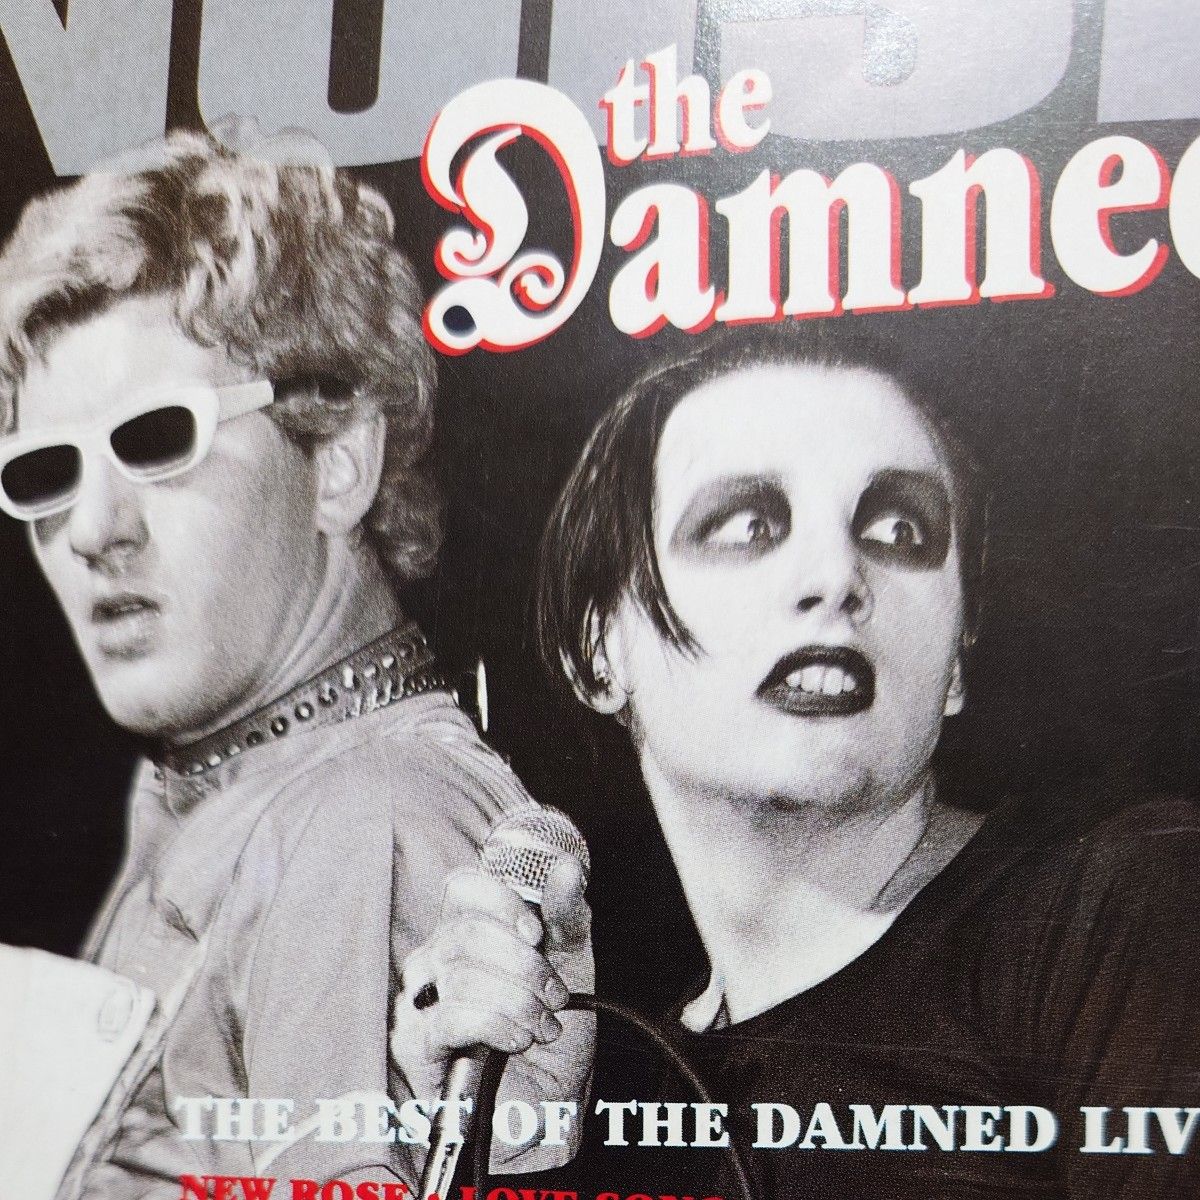 the damned／the best of the damned live 輸入盤CD